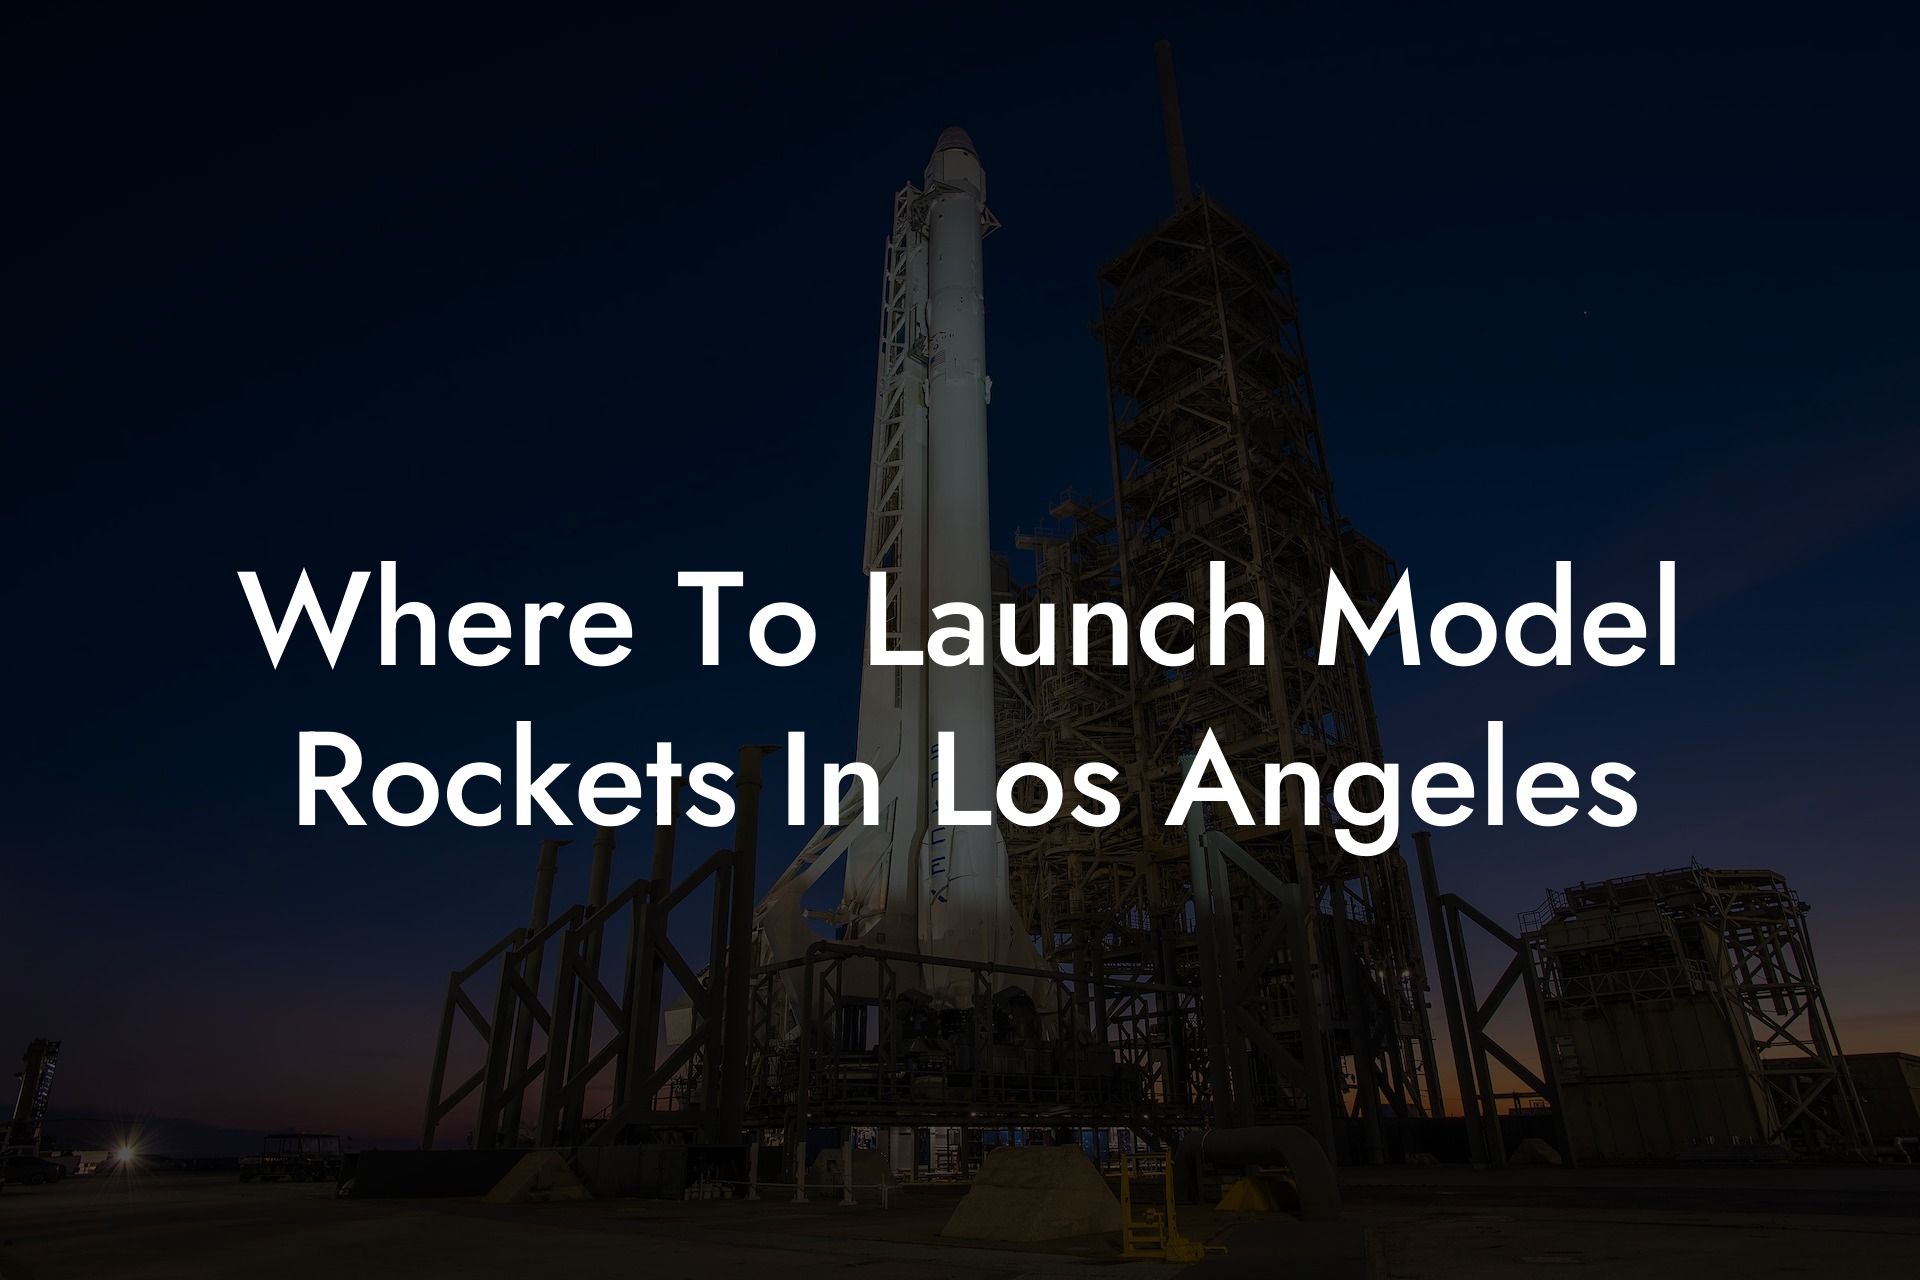 Where To Launch Model Rockets In Los Angeles